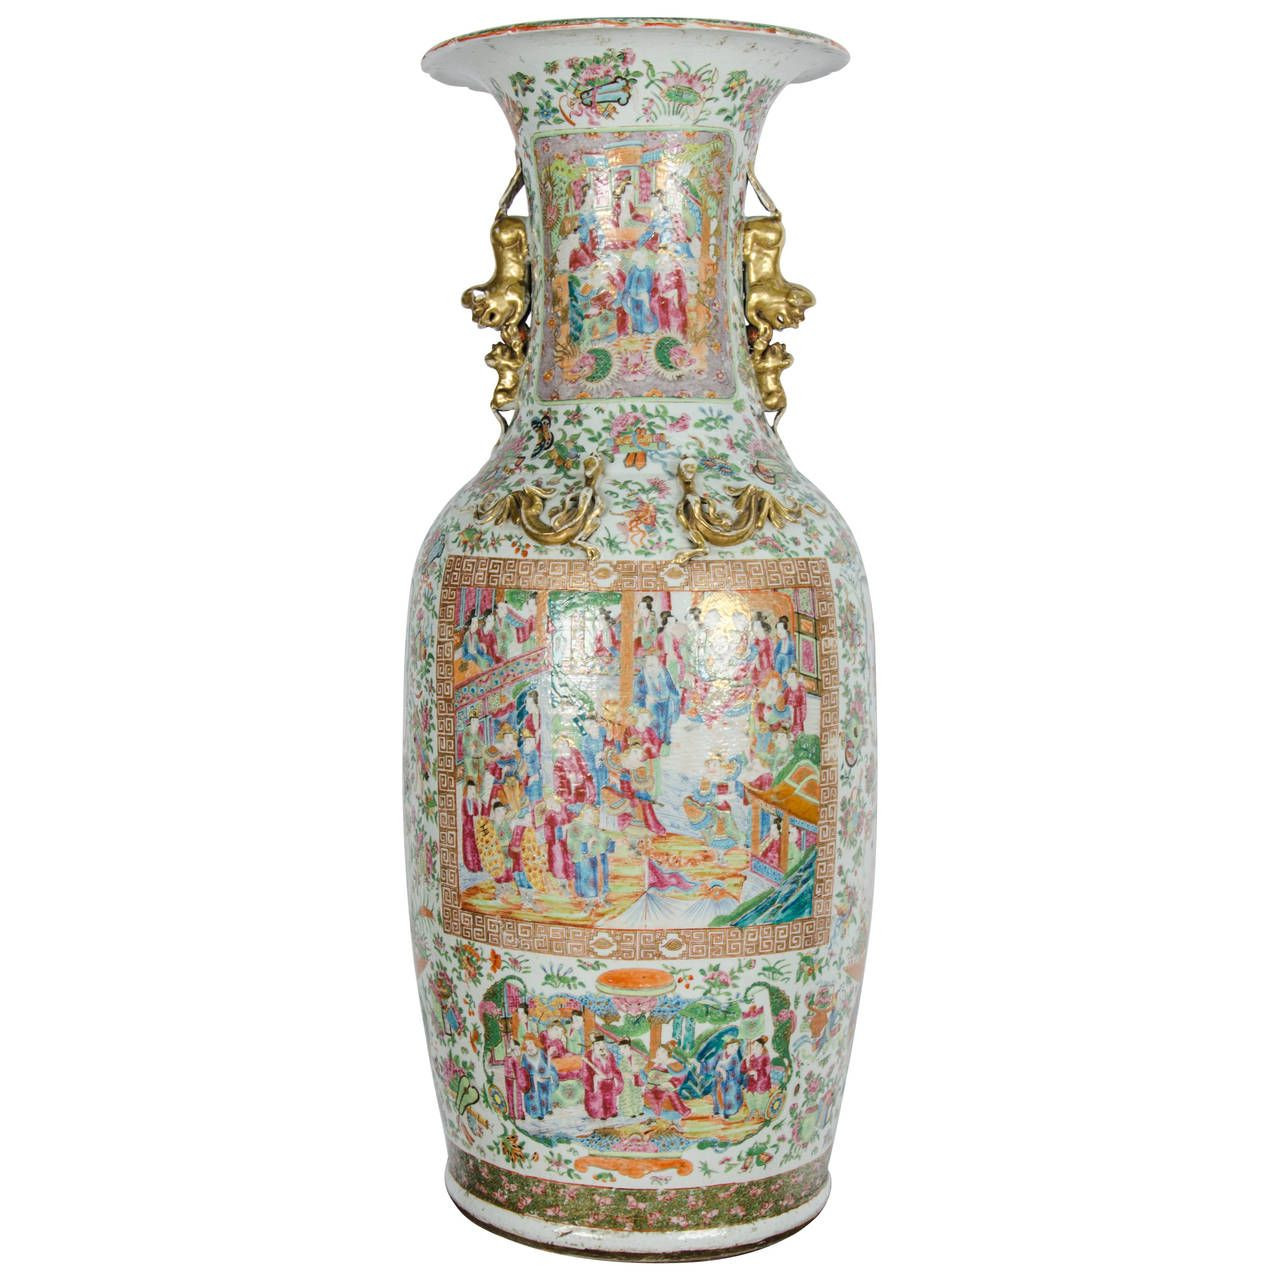 20 Nice asian Vases for Sale 2024 free download asian vases for sale of large 19th century chinese rose medallion vase on stand pinterest within large 19th century chinese rose medallion vase on stand 1stdibs com